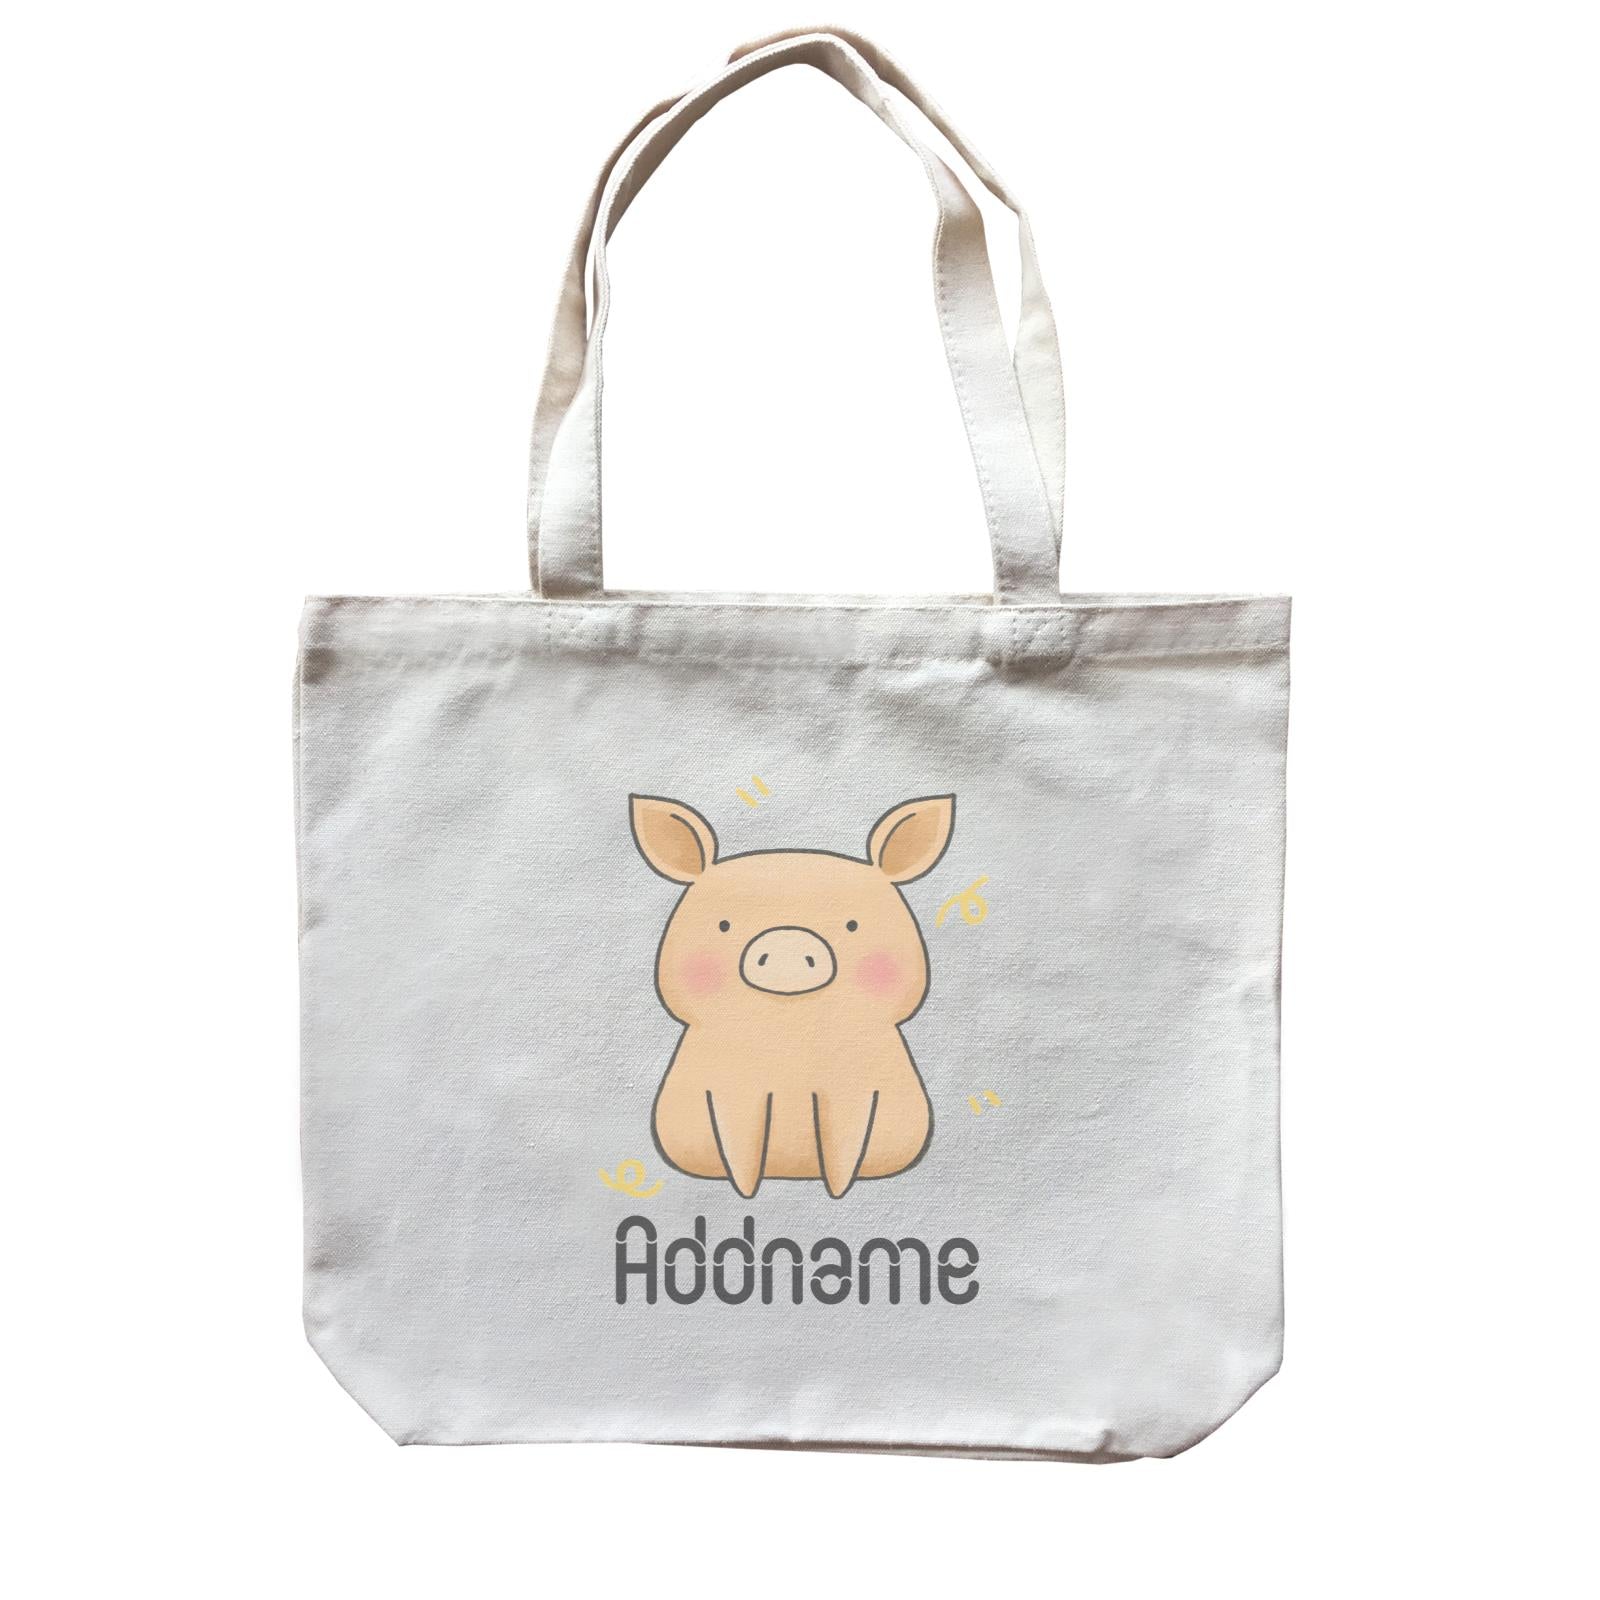 Cute Hand Drawn Style Pig Addname Canvas Bag